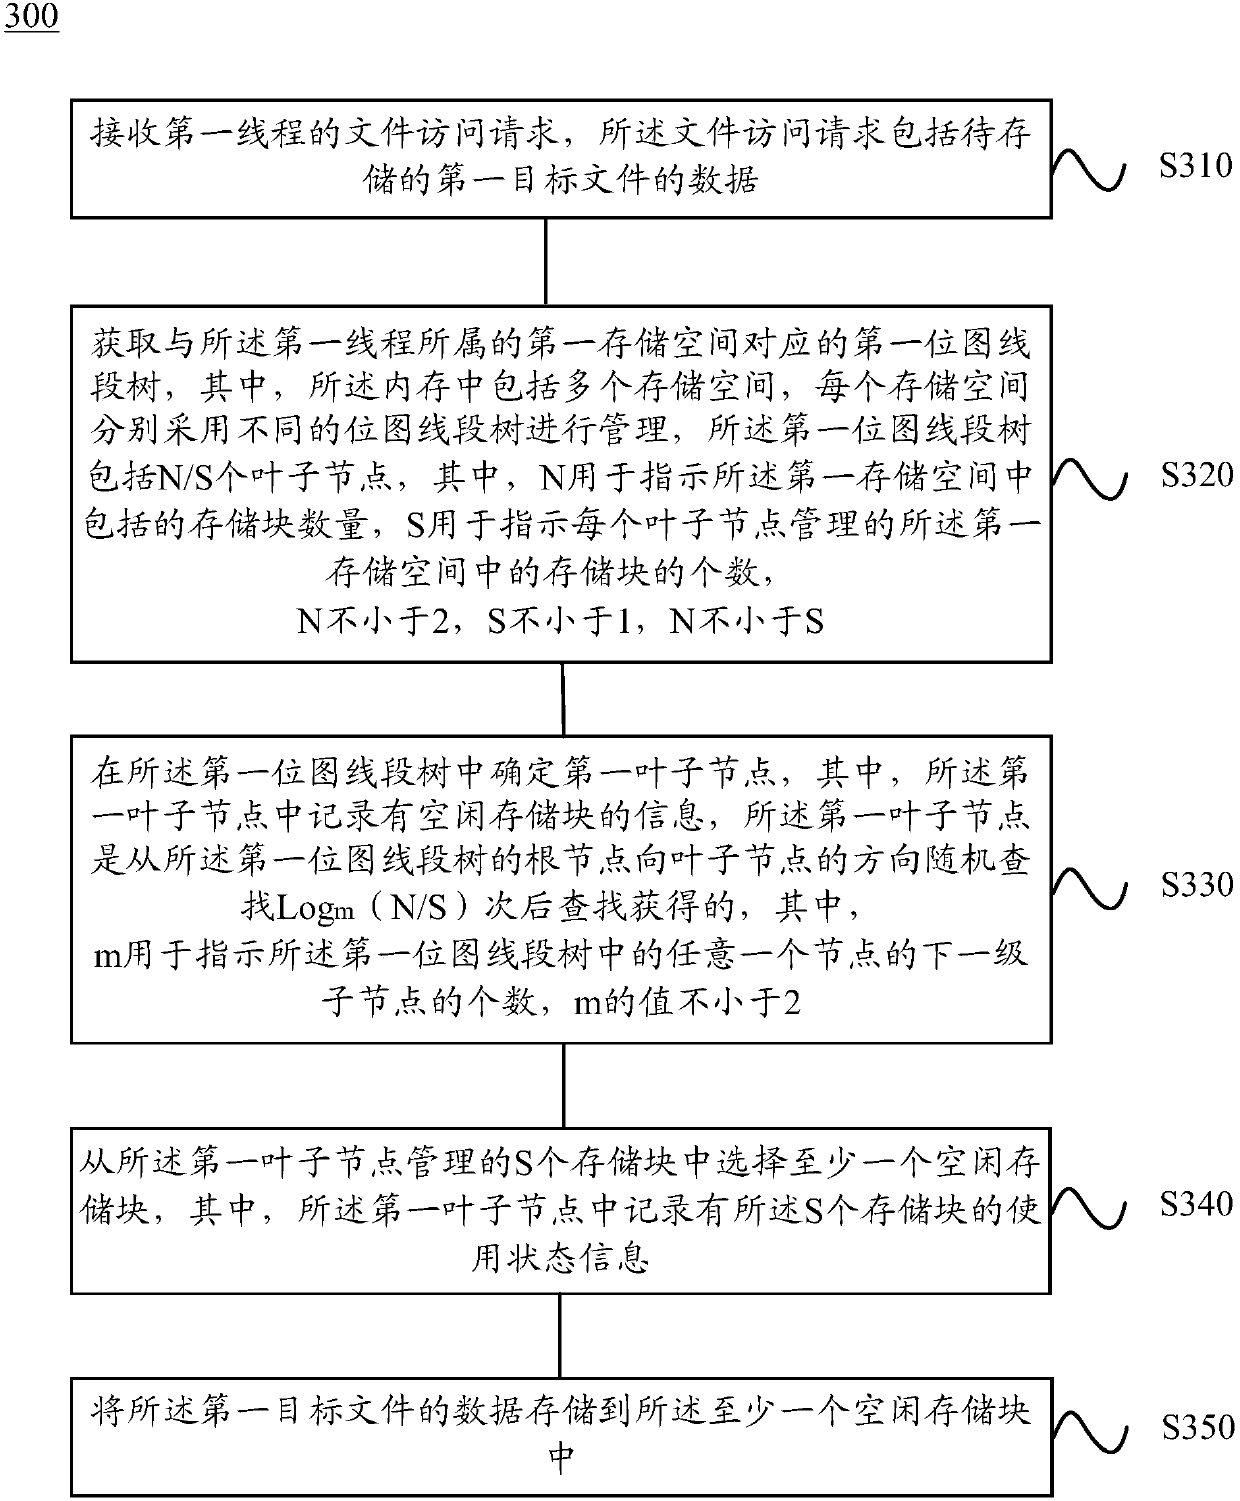 Memory space management method and apparatus